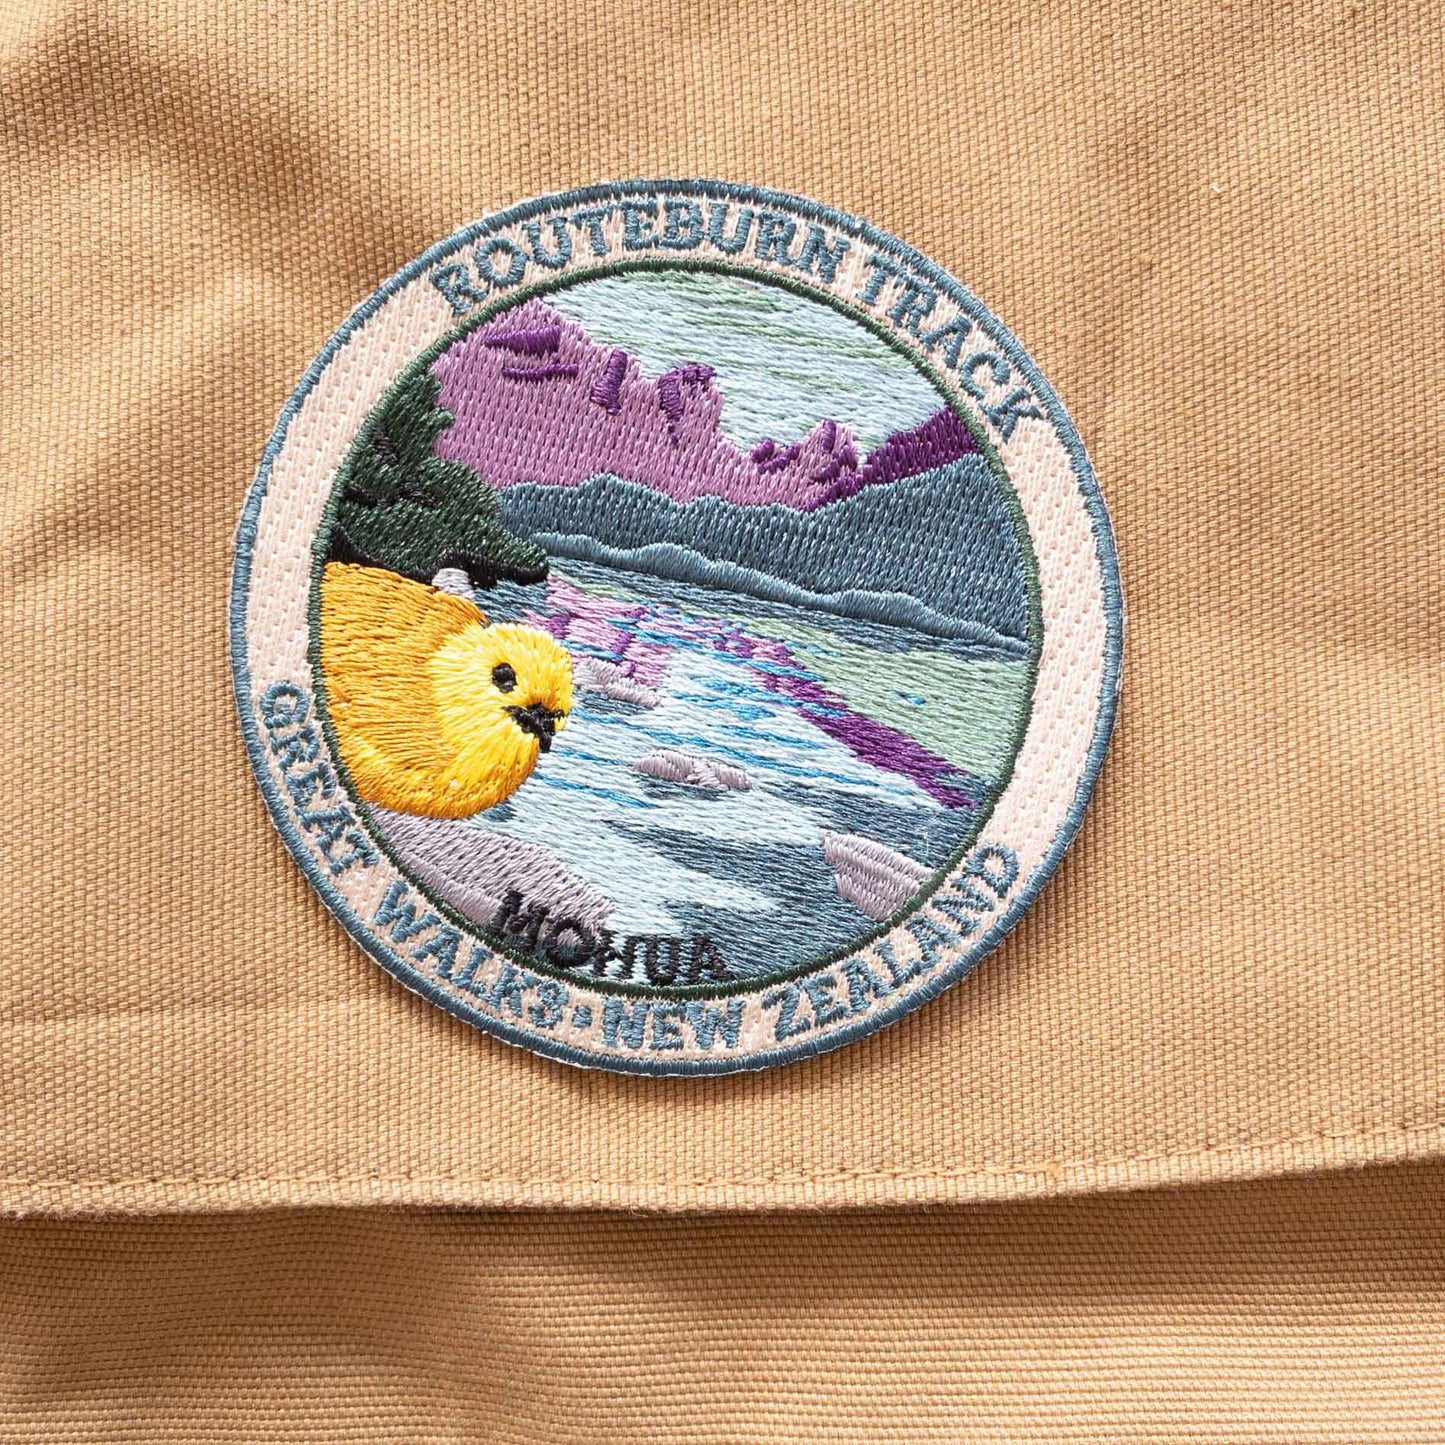 Round, embroidered Routeburn Track patch, with a mohua/yellowhead bird, purple mountains and blue lake, on a brown canvas bag..